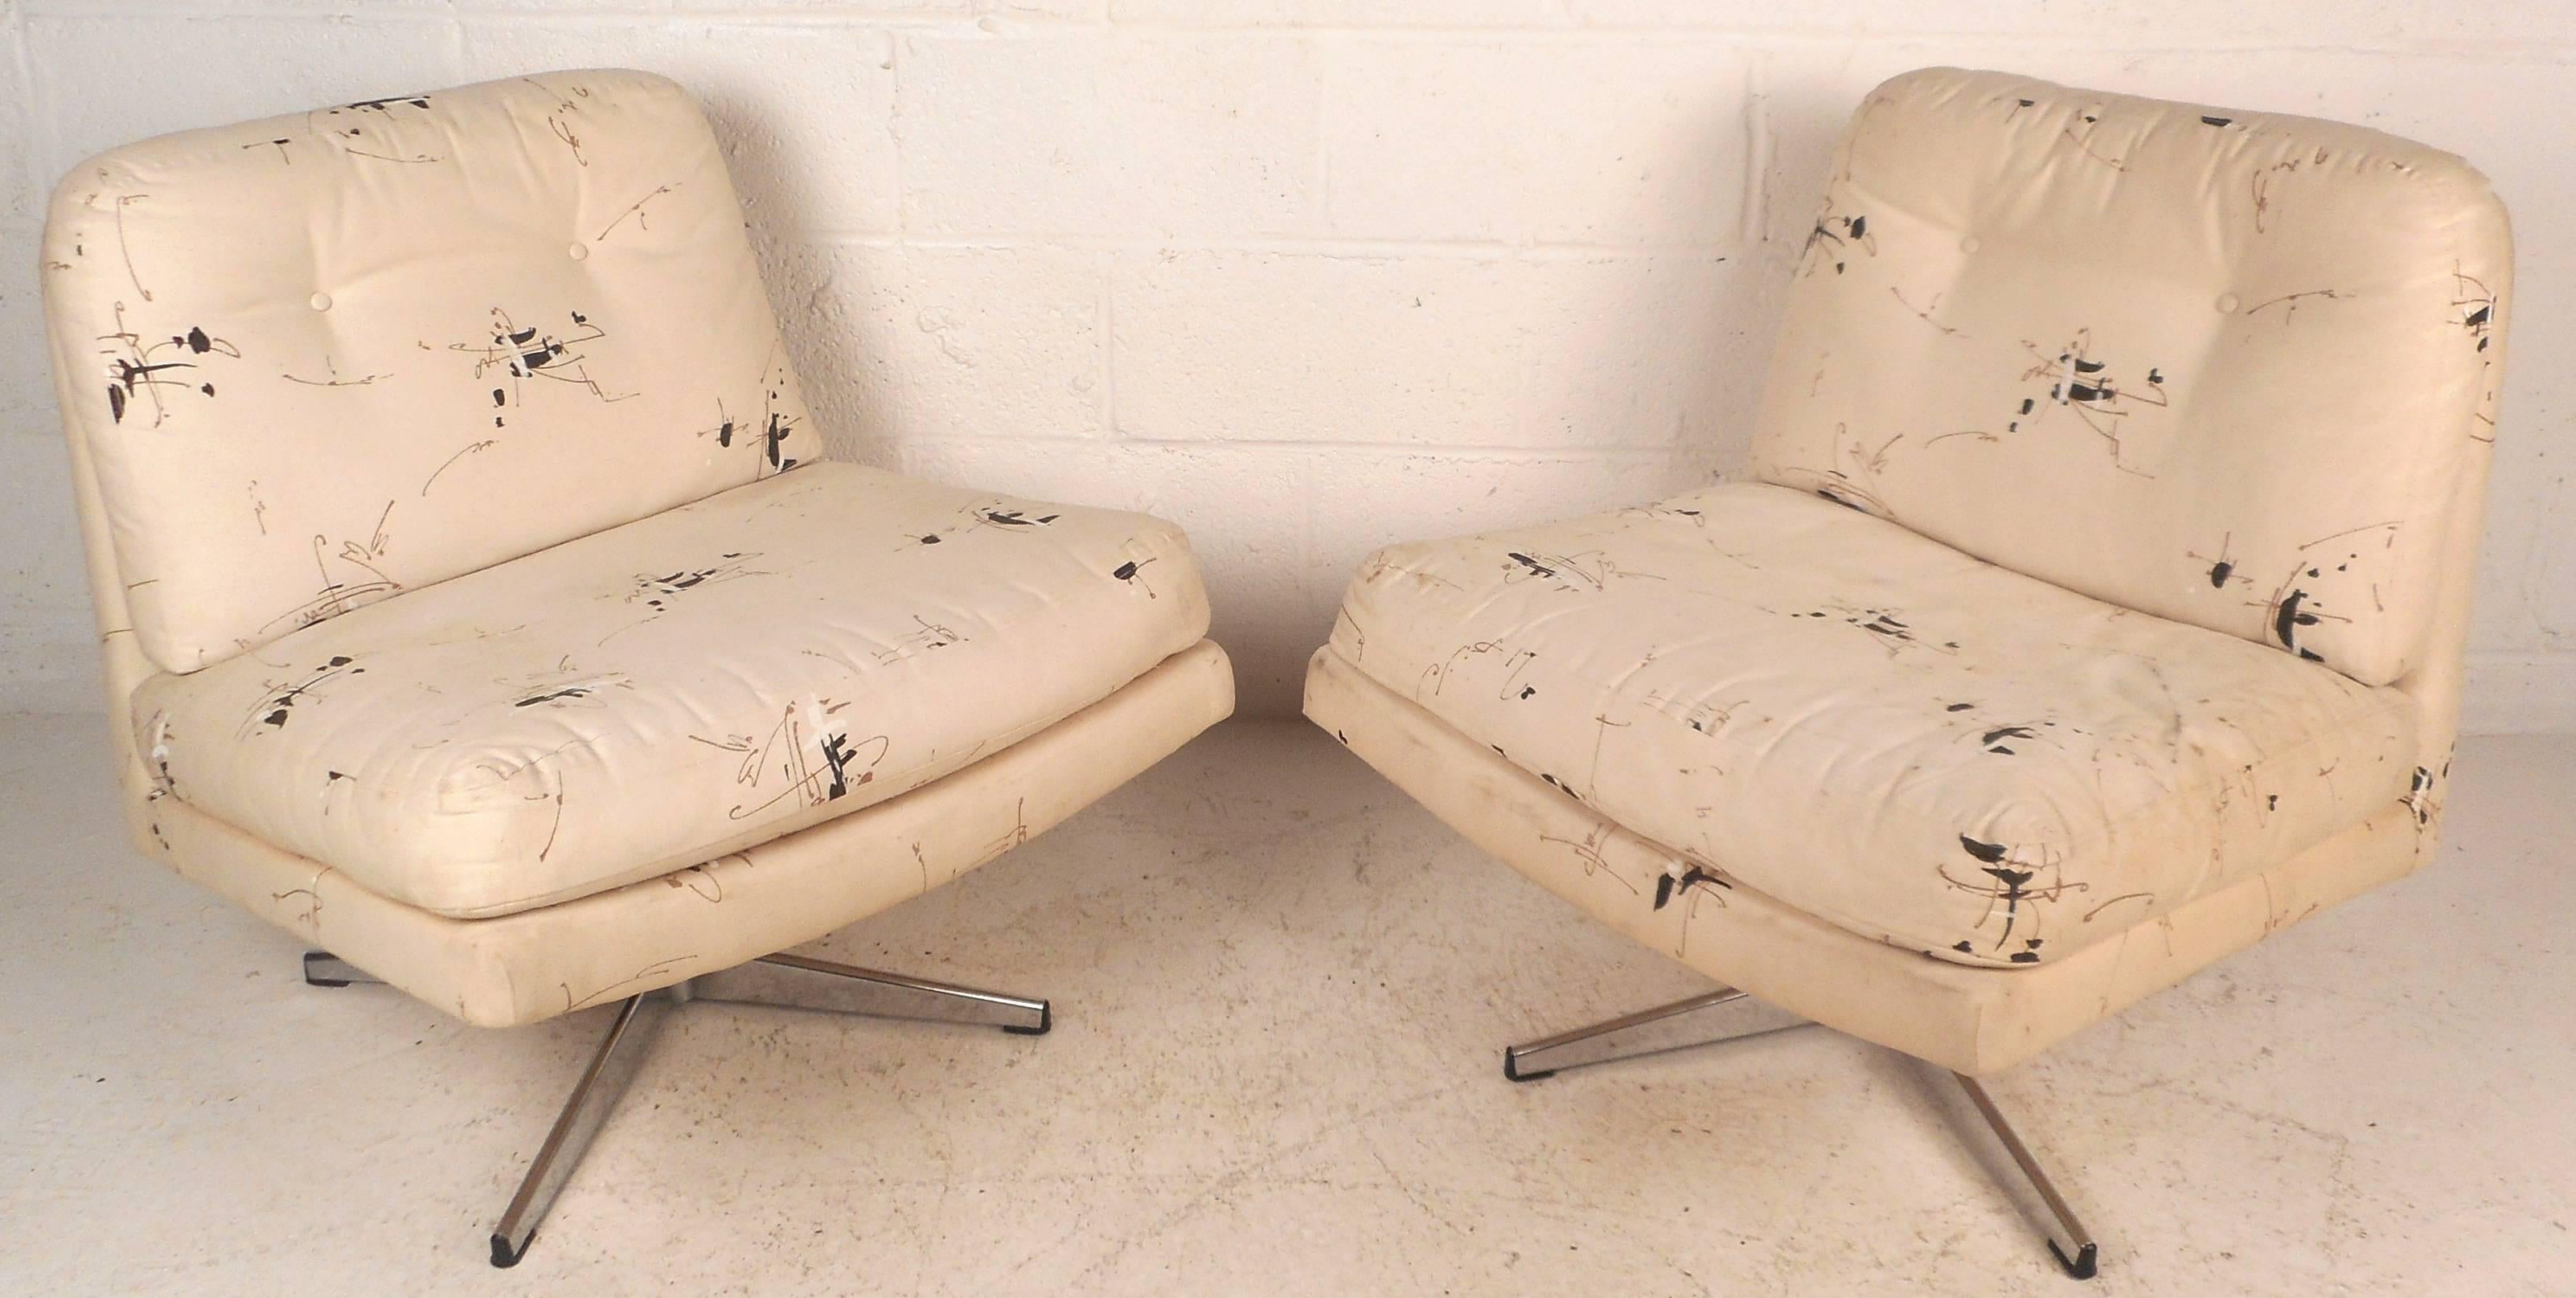 This gorgeous pair of vintage modern lounge chairs feature a slipper design with wide seating and the ability to swivel. Thick padded cushions and original tufted upholstery add to the allure. Unique mid-century pair of lounge chairs ensure comfort